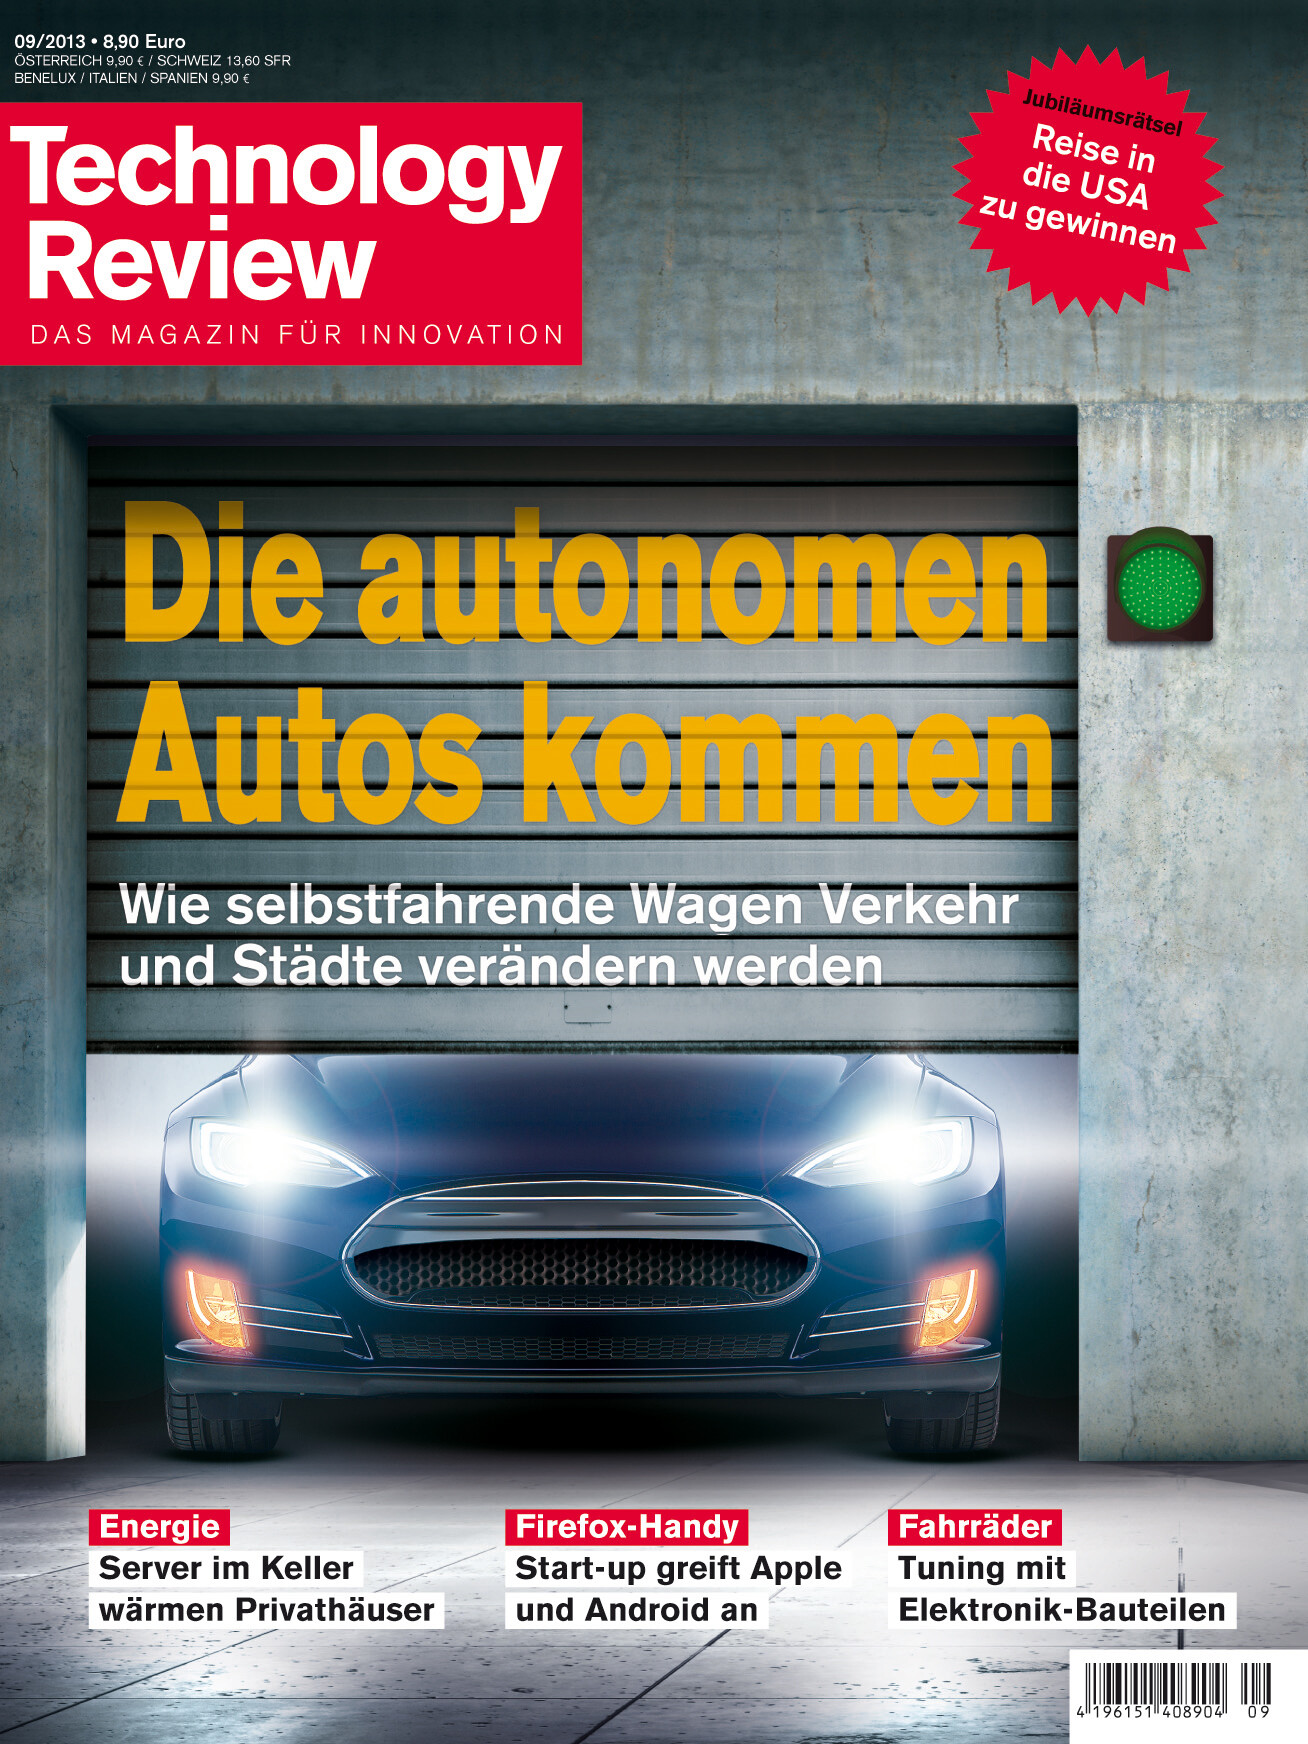 Technology Review 09/2013